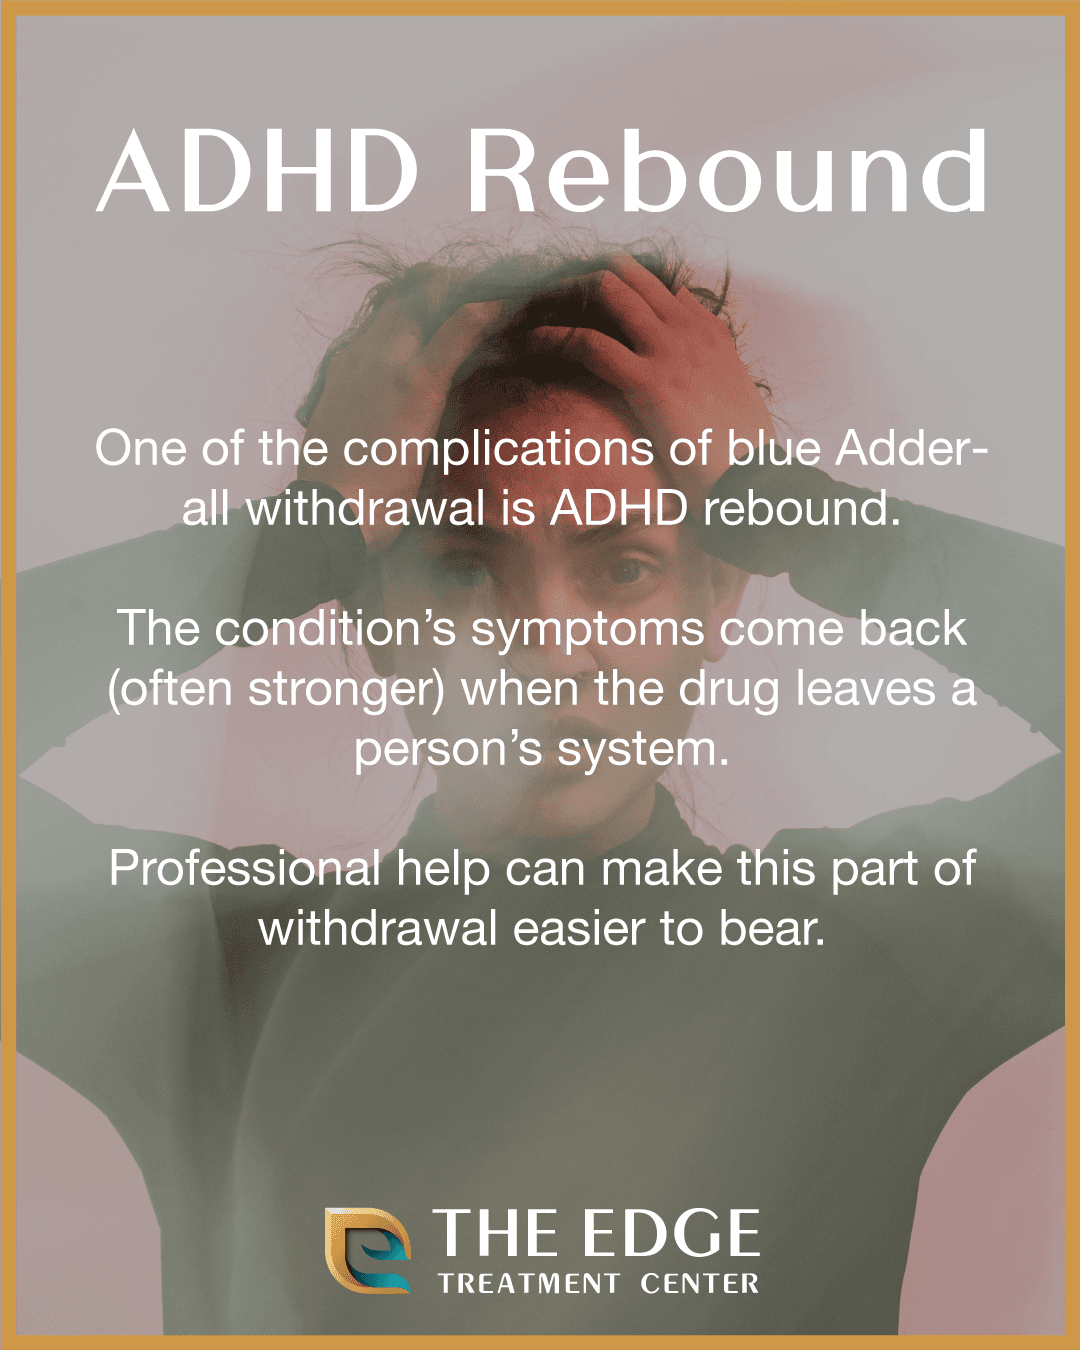 What is ADHD Rebound?